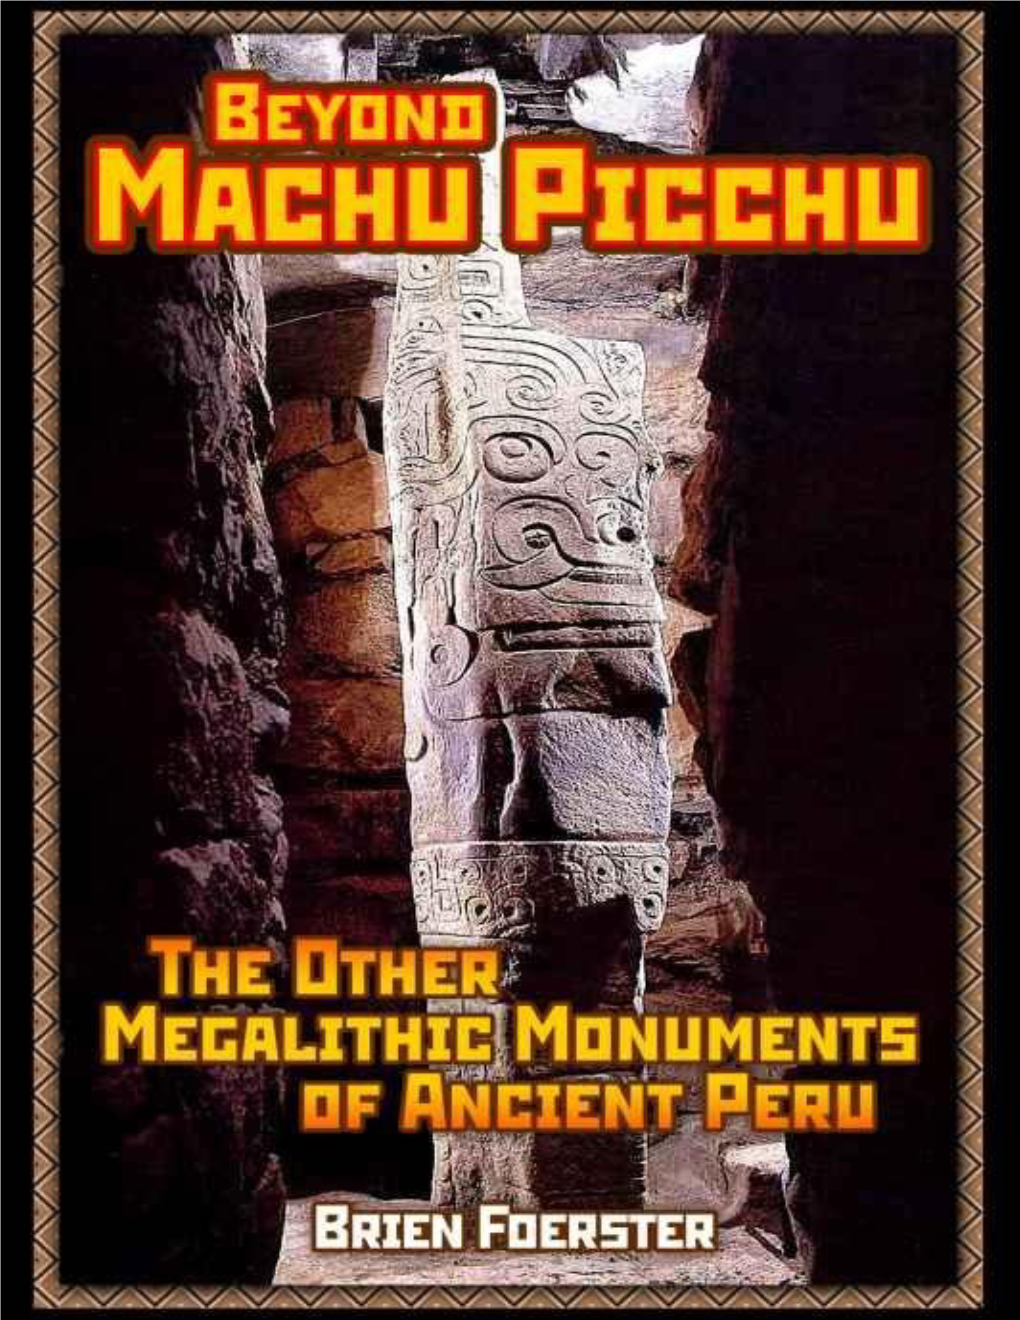 Beyond Machu Picchu: the Other Megalithic Monuments of Ancient